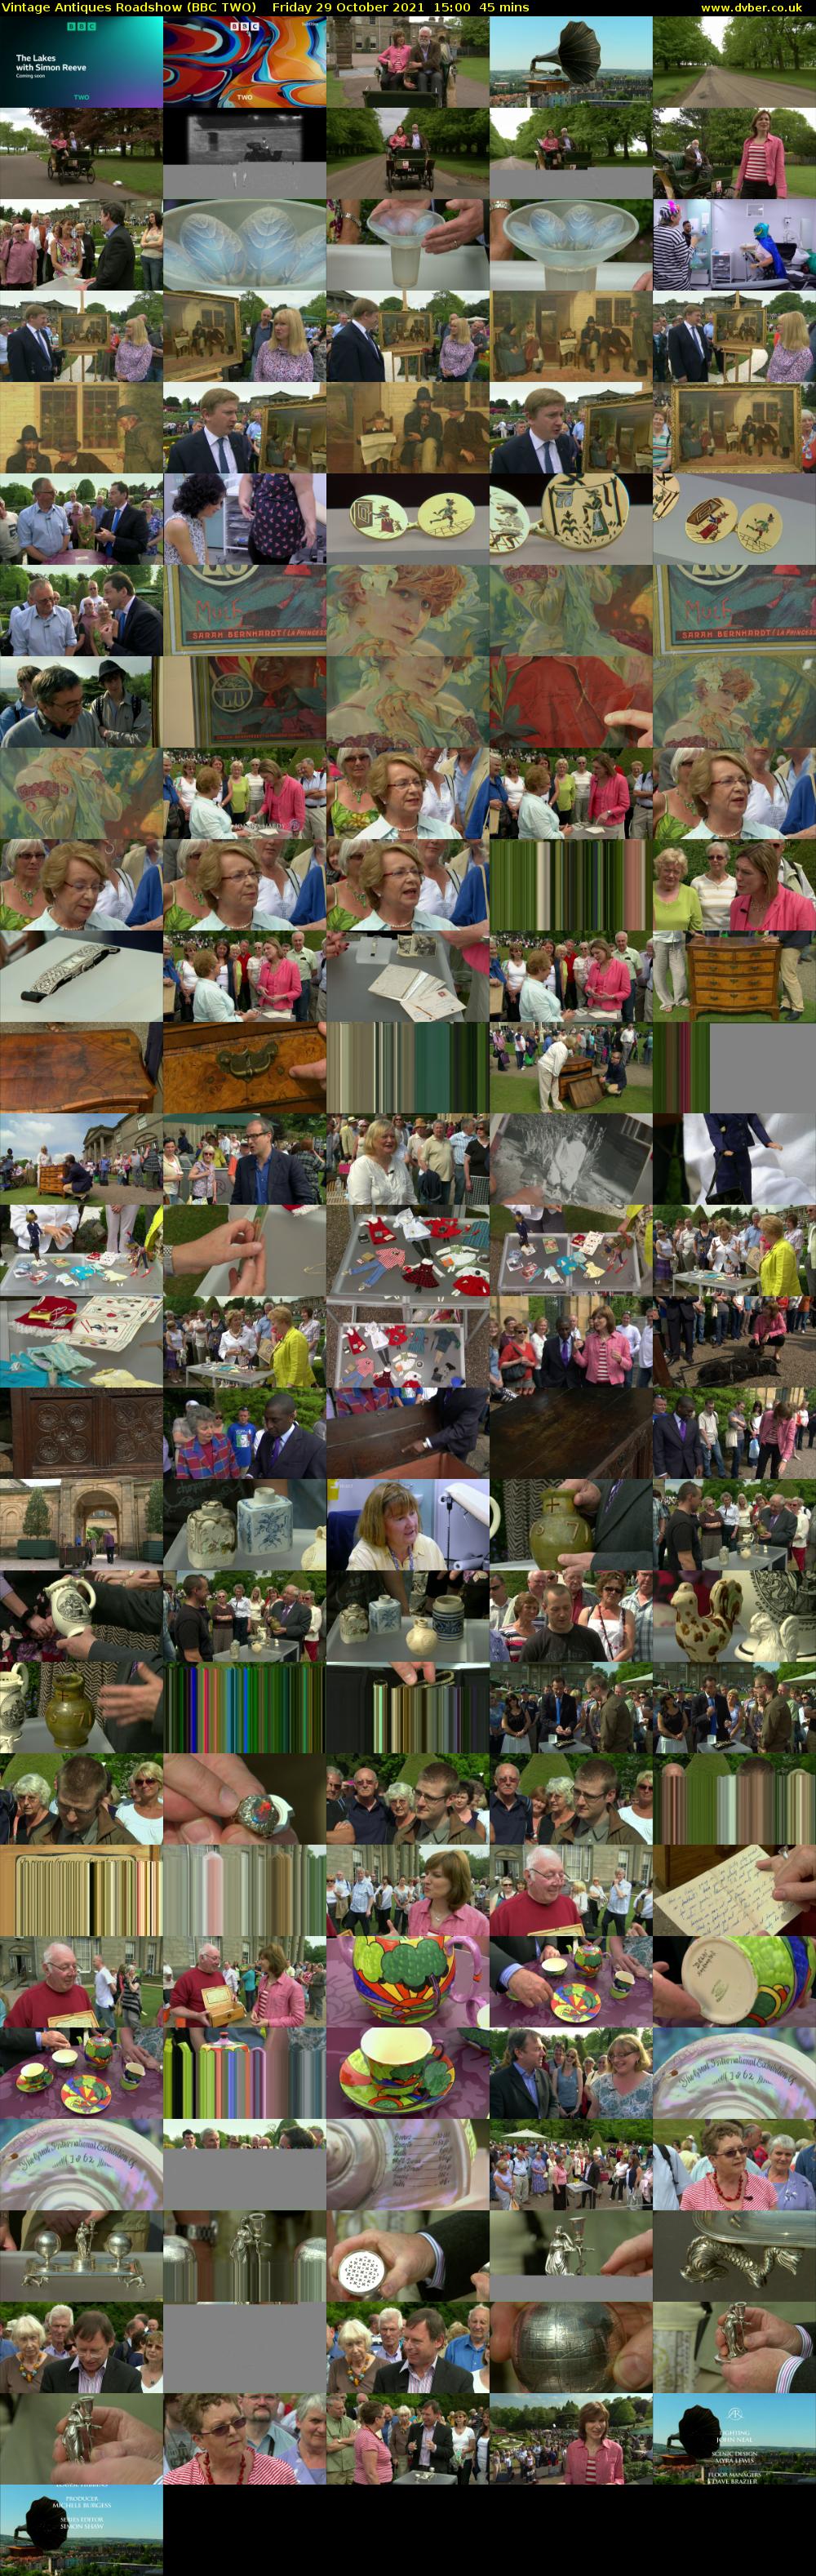 Vintage Antiques Roadshow (BBC TWO) Friday 29 October 2021 15:00 - 15:45